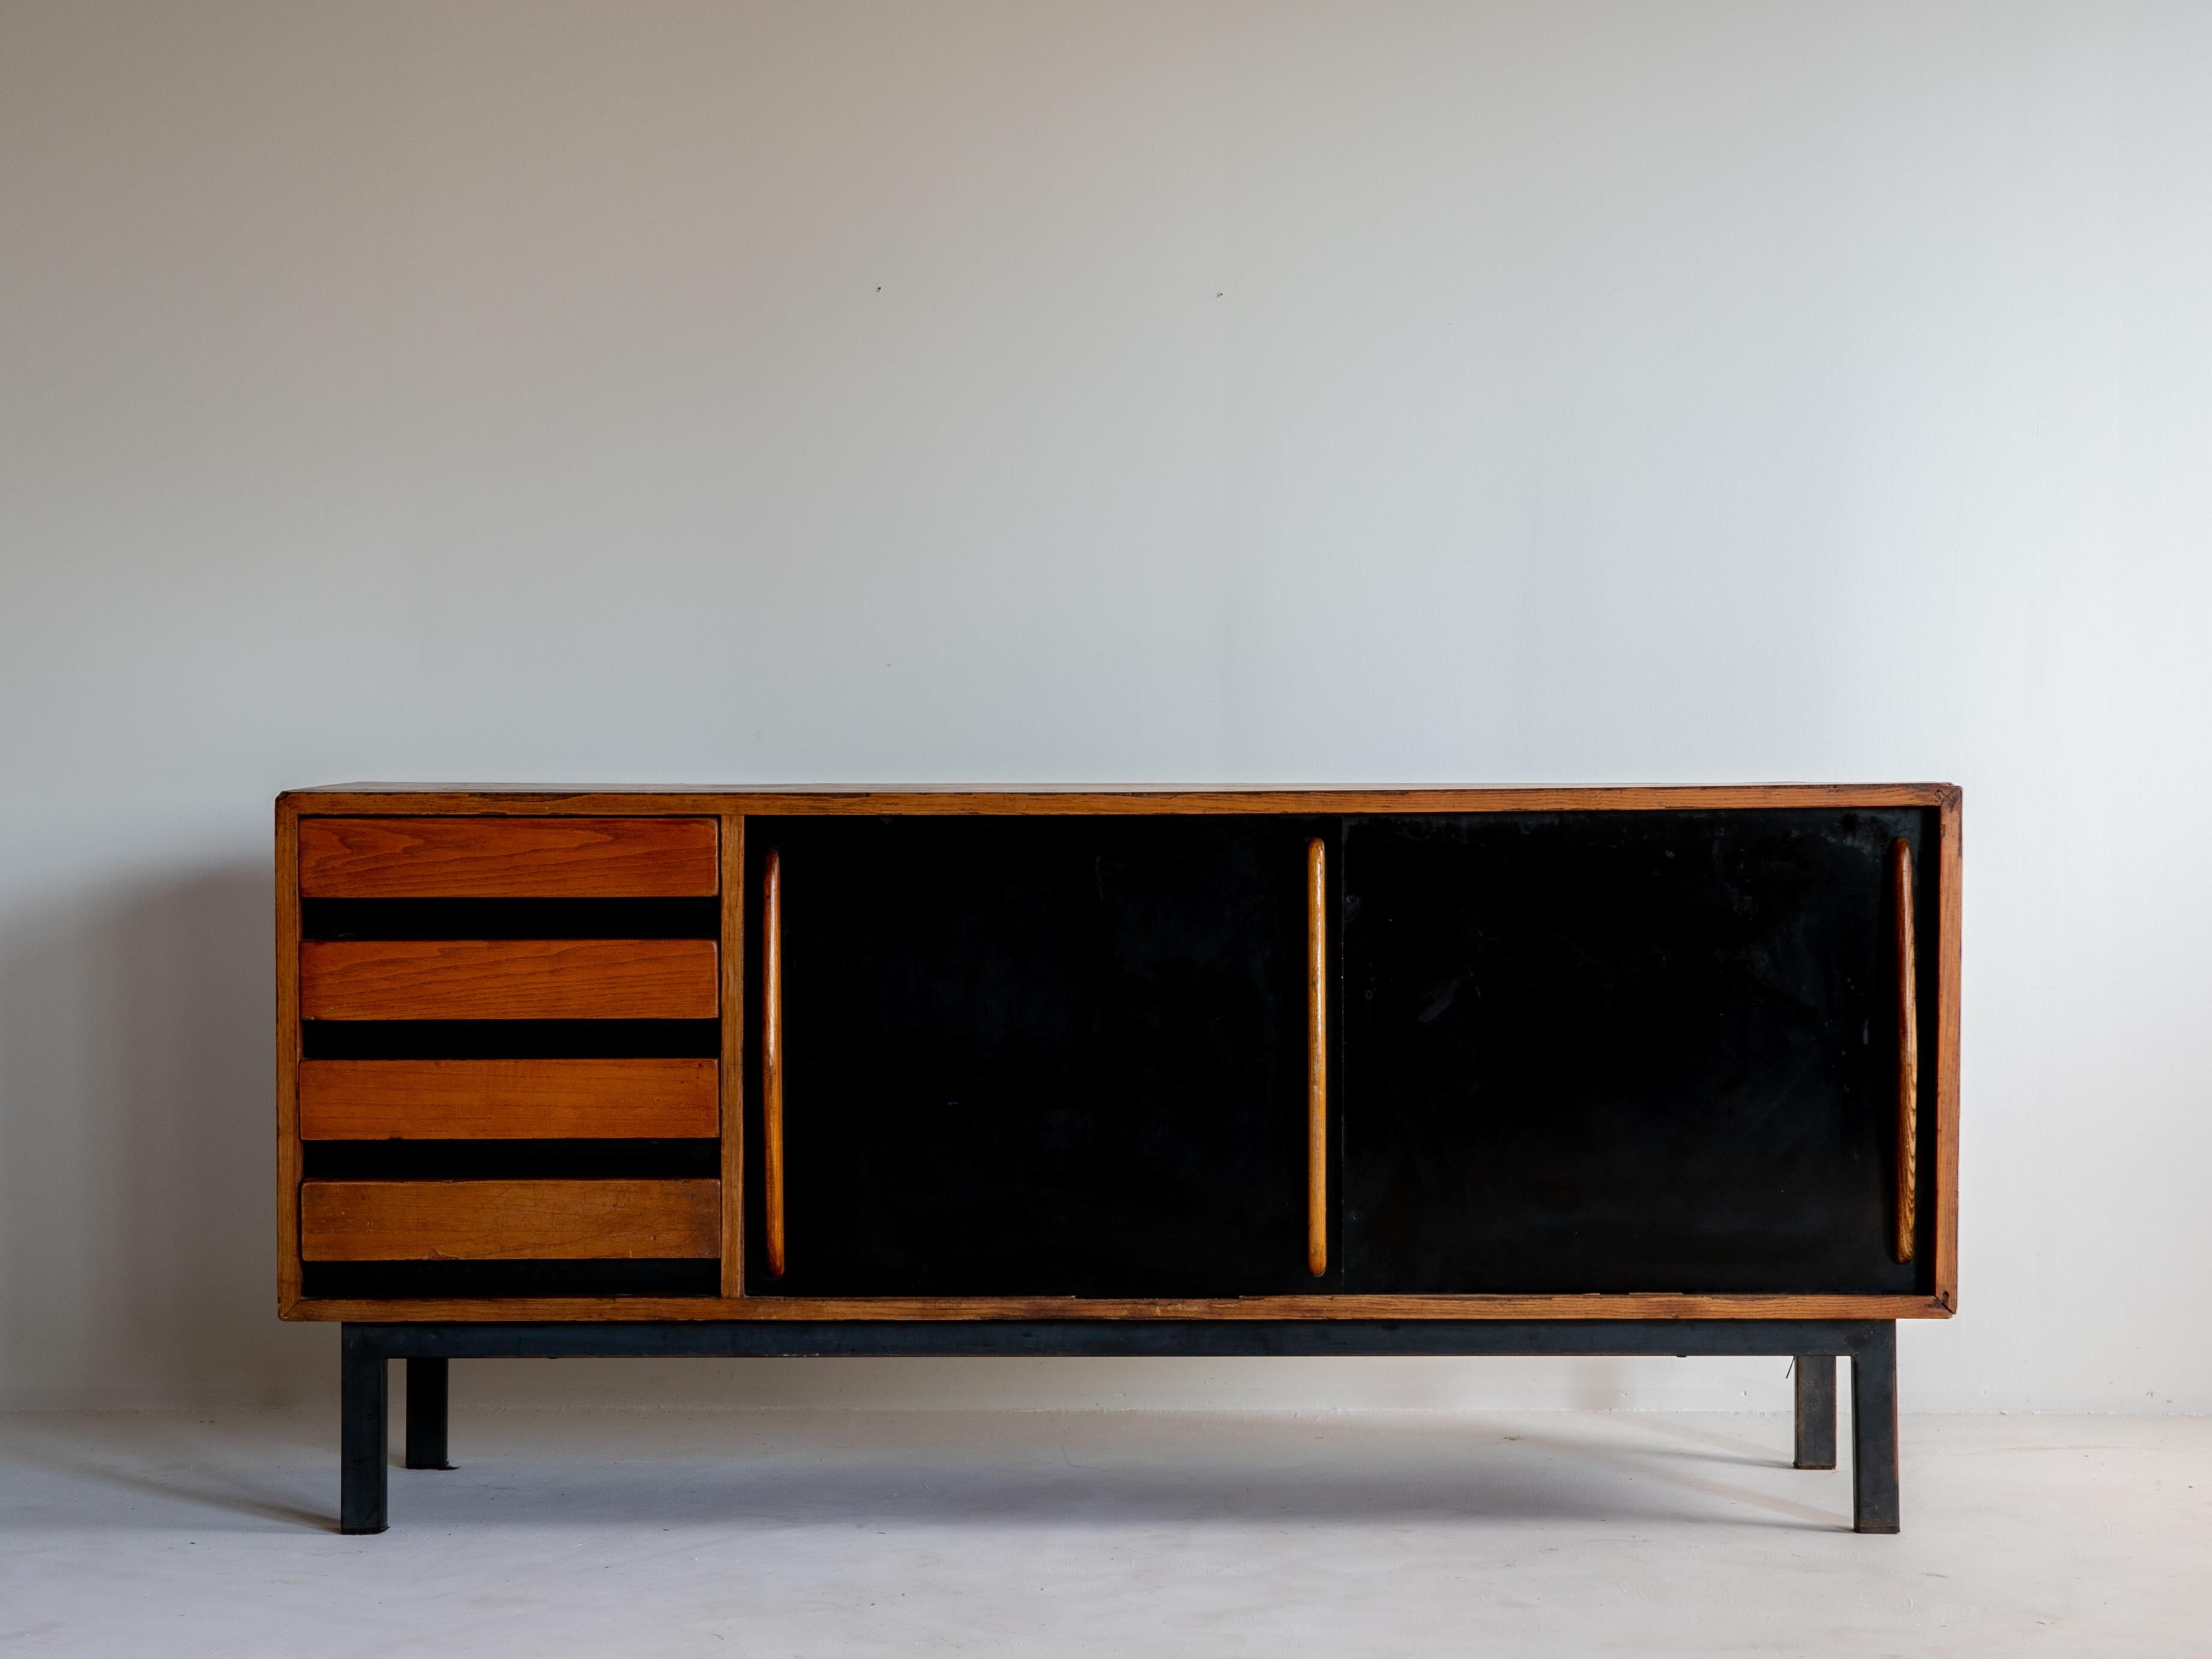 Sideboard designed by Charlotte Perriand.
Designed for the project 